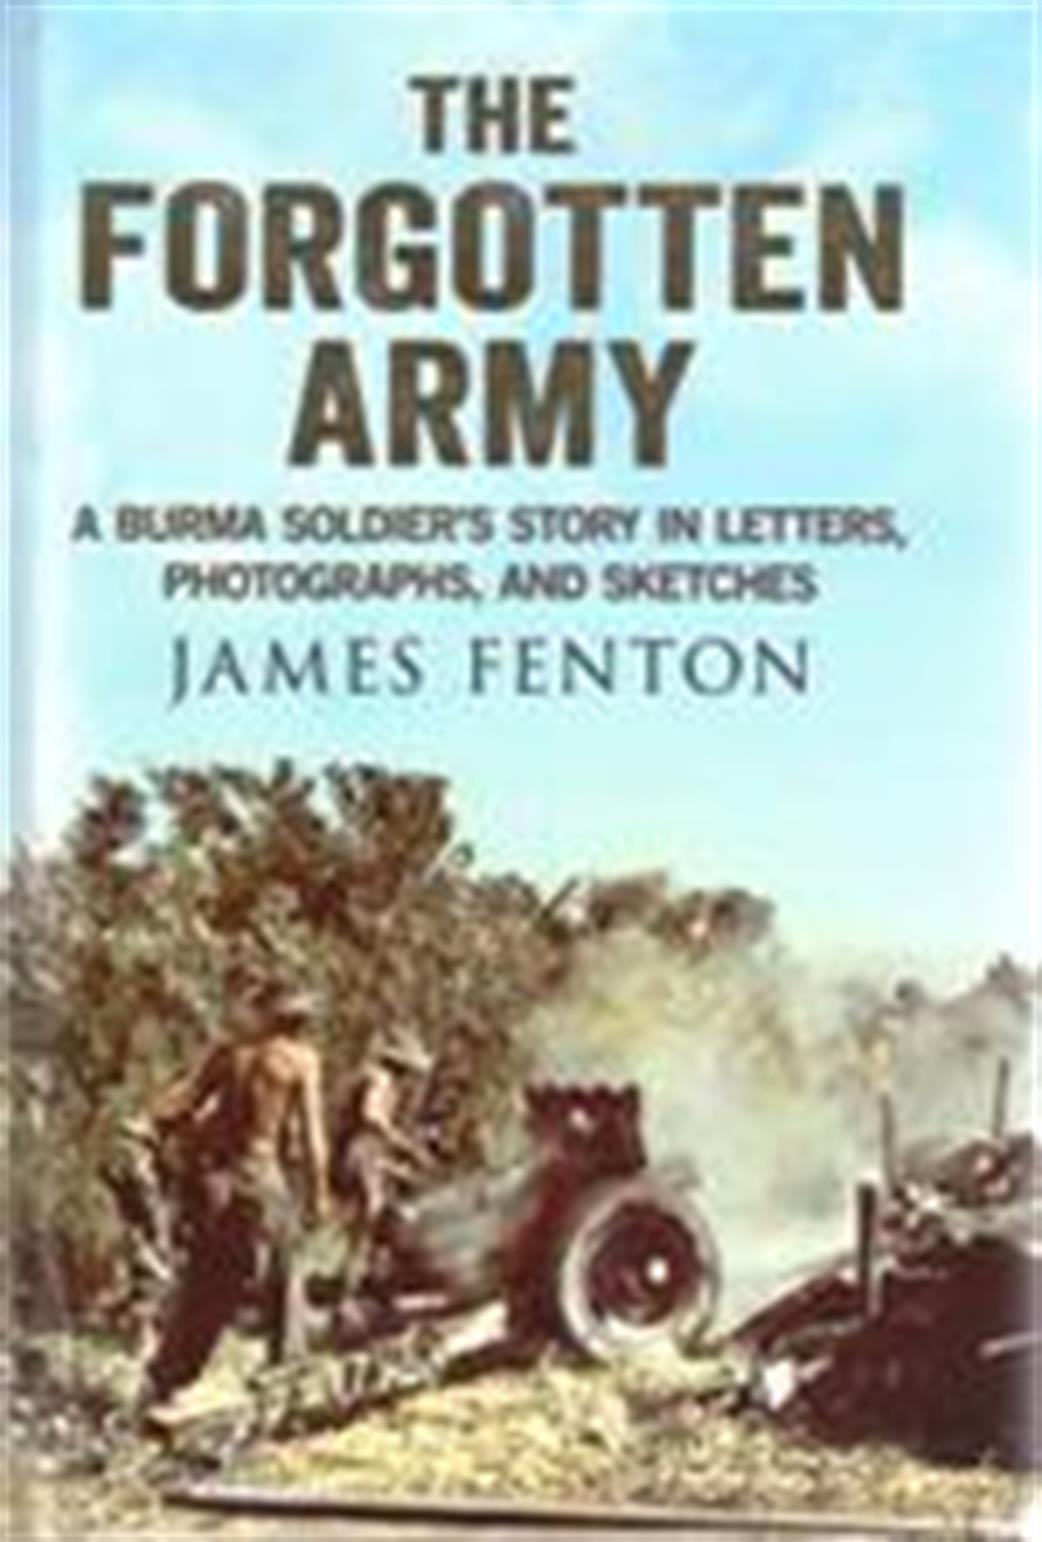 9781781550472 The Forgotten Army by James Fenton